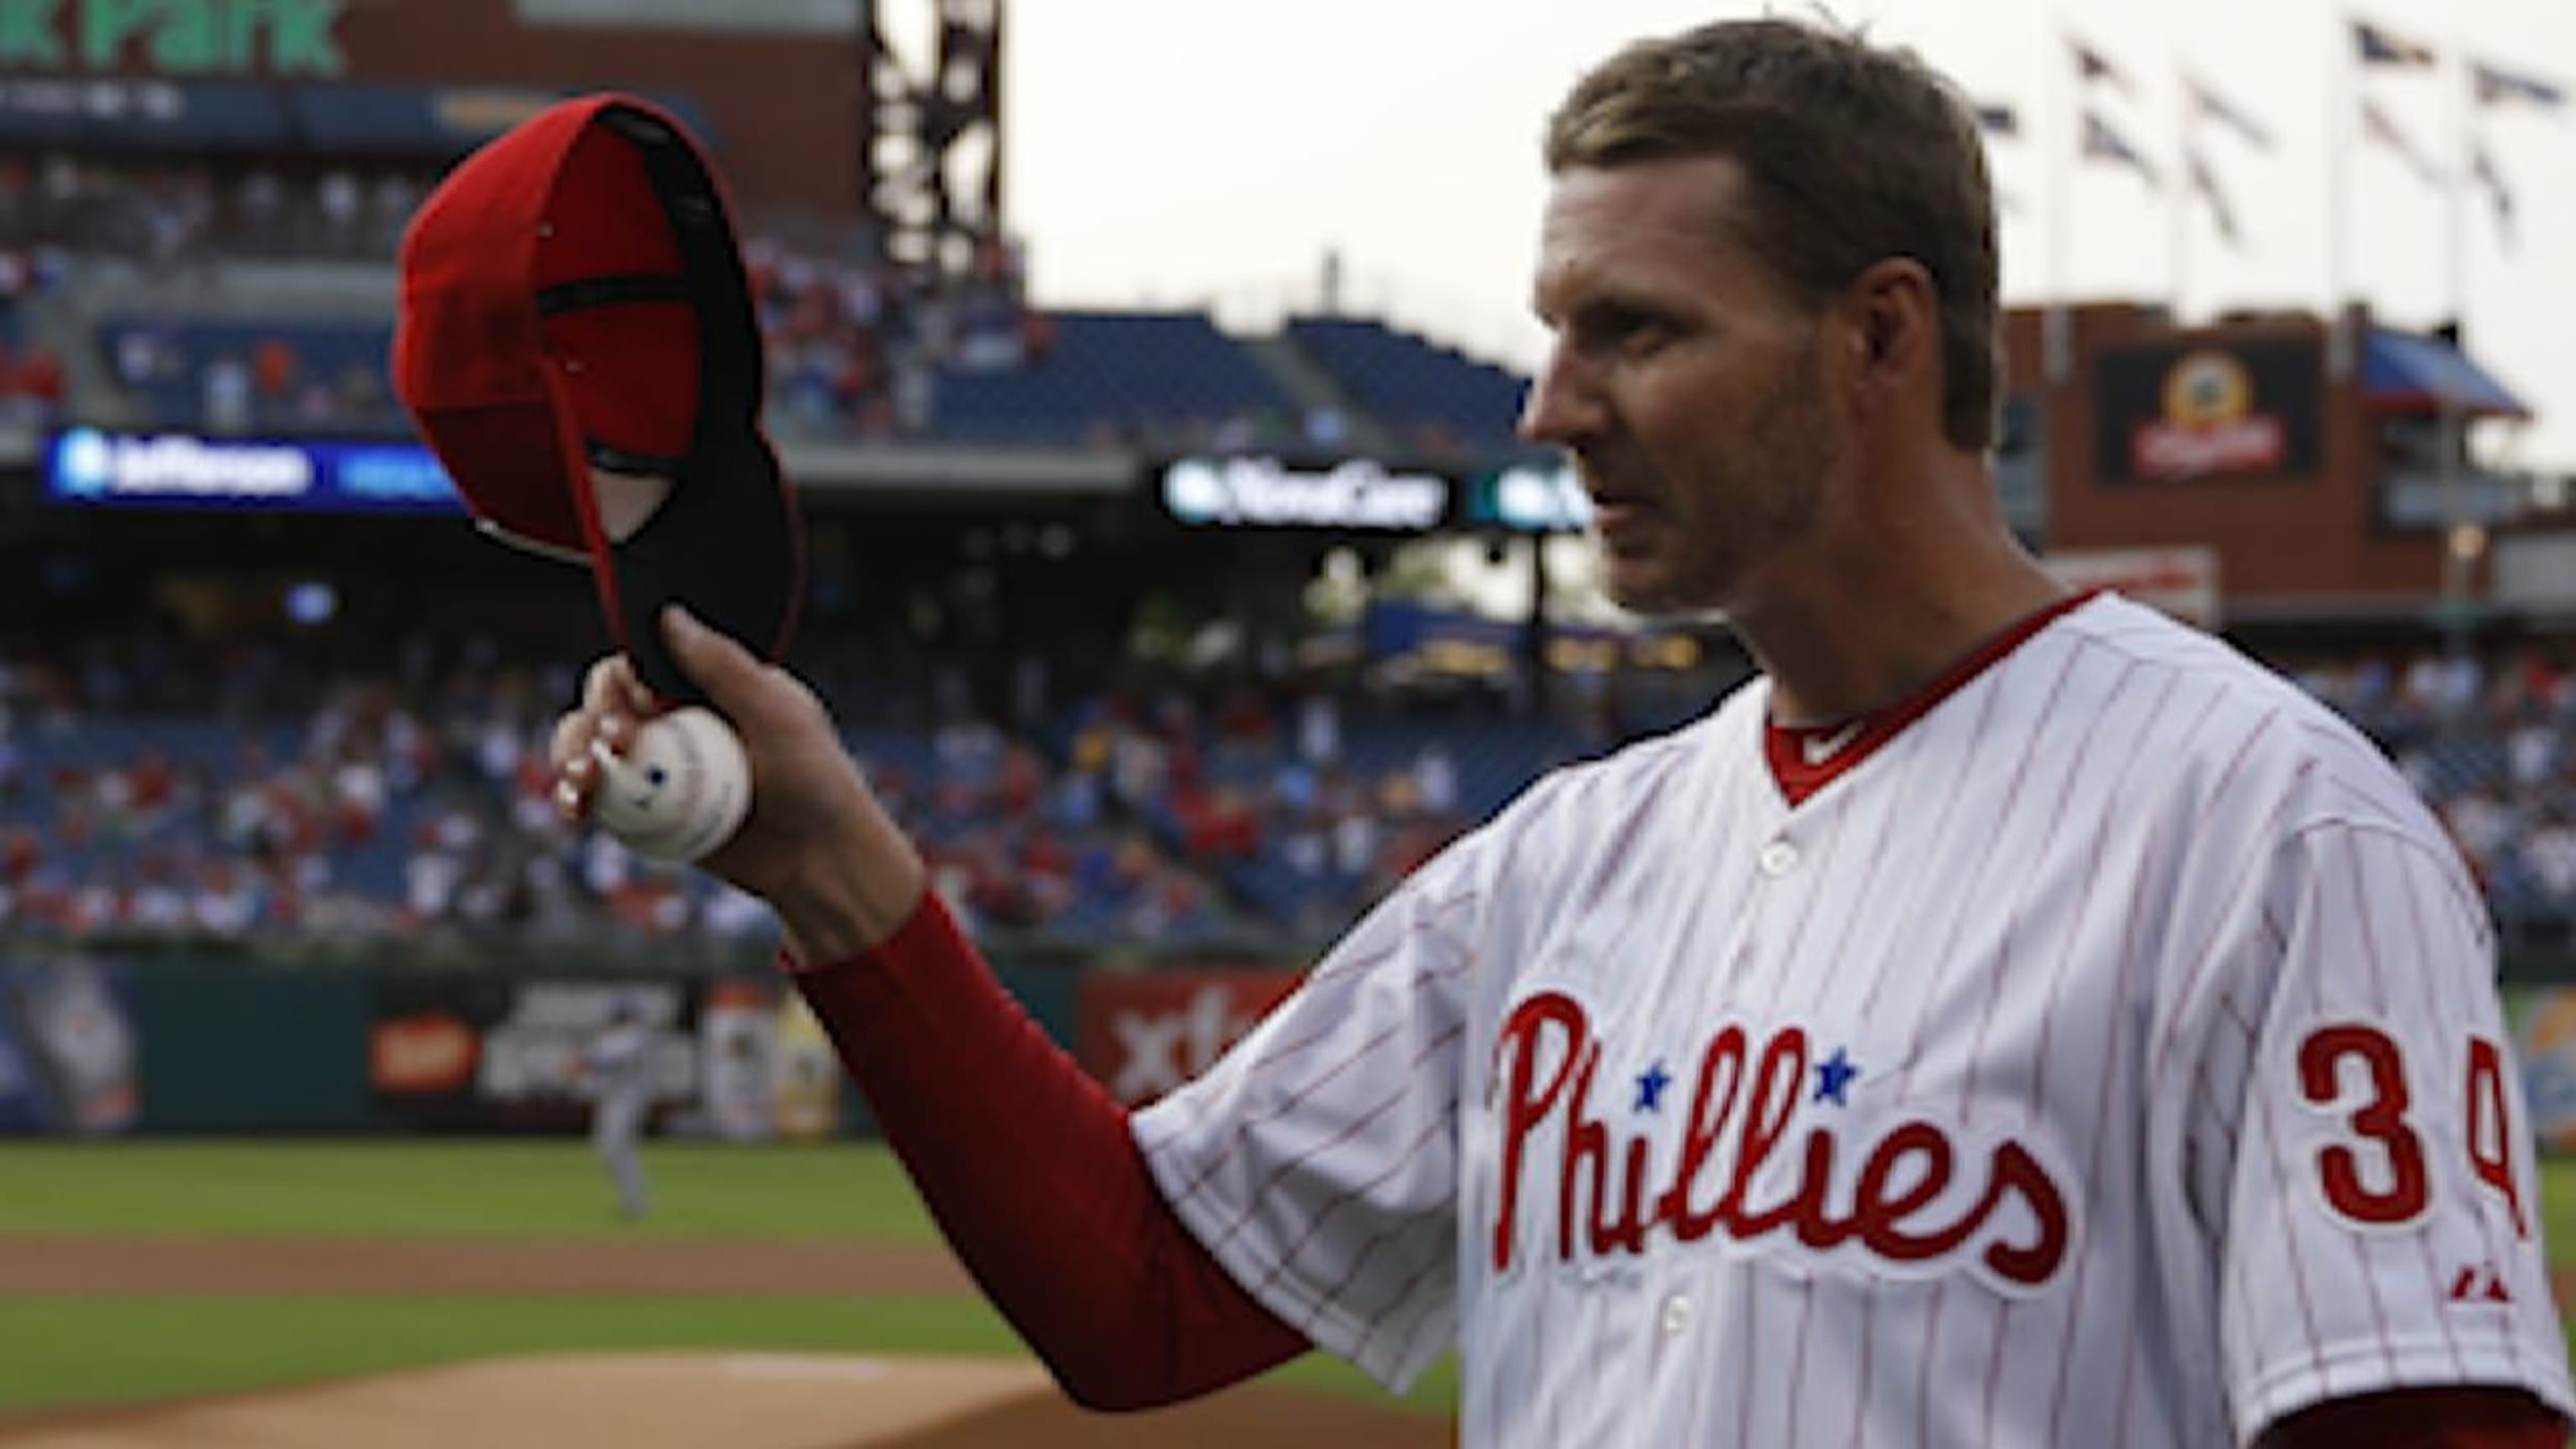 Halladay was as humble as he was dominating for Phillies